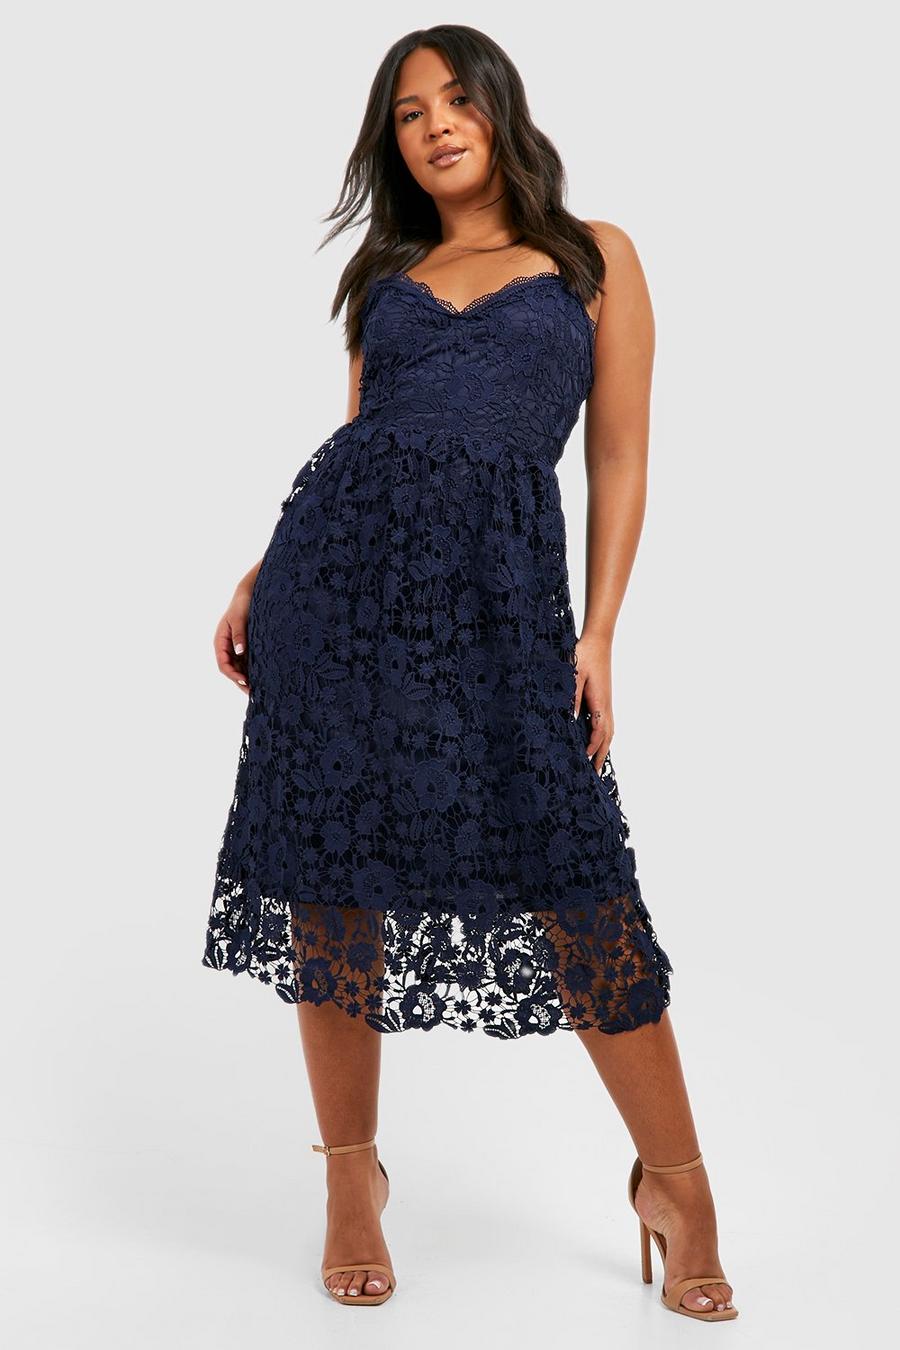 Plus Size Dresses for a Wedding Guest -  Canada